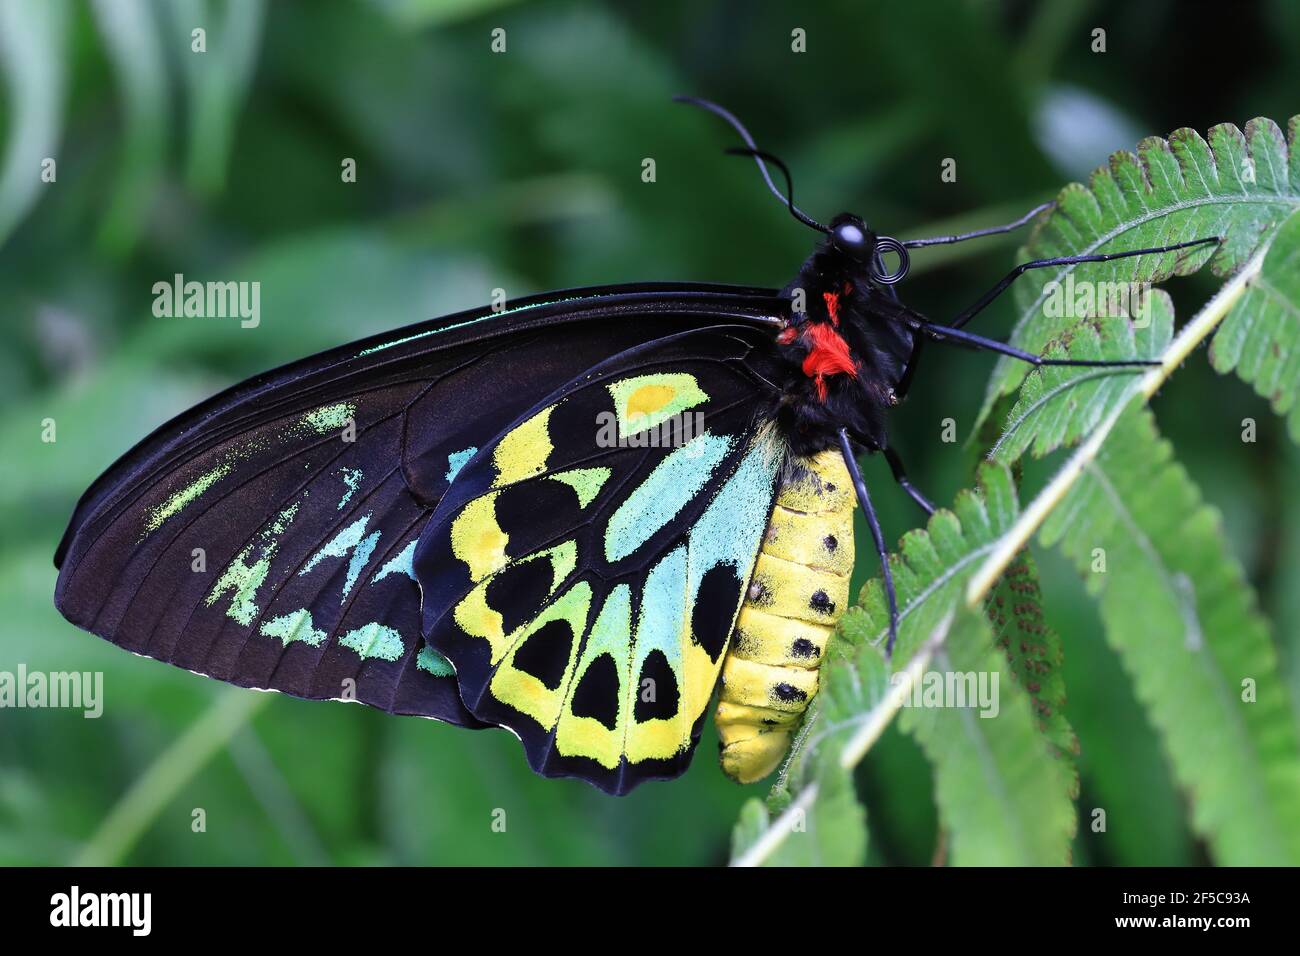 A beautiful male Cairns Birdwing butterfly resting on a leaf with wings closed. Stock Photo